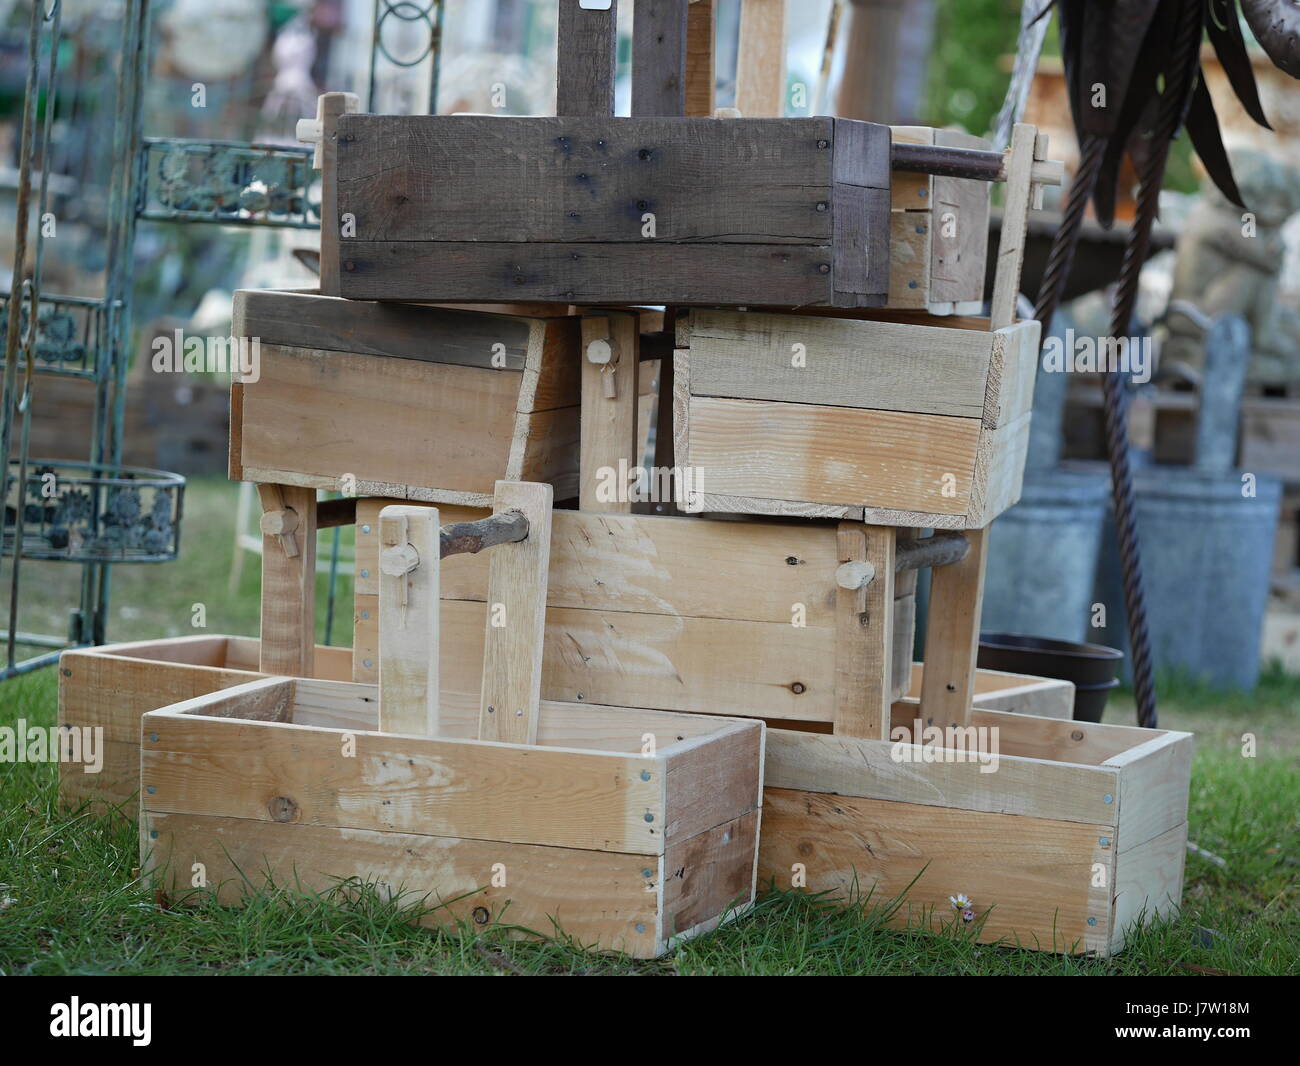 wooden crates at a gardening show Stock Photo